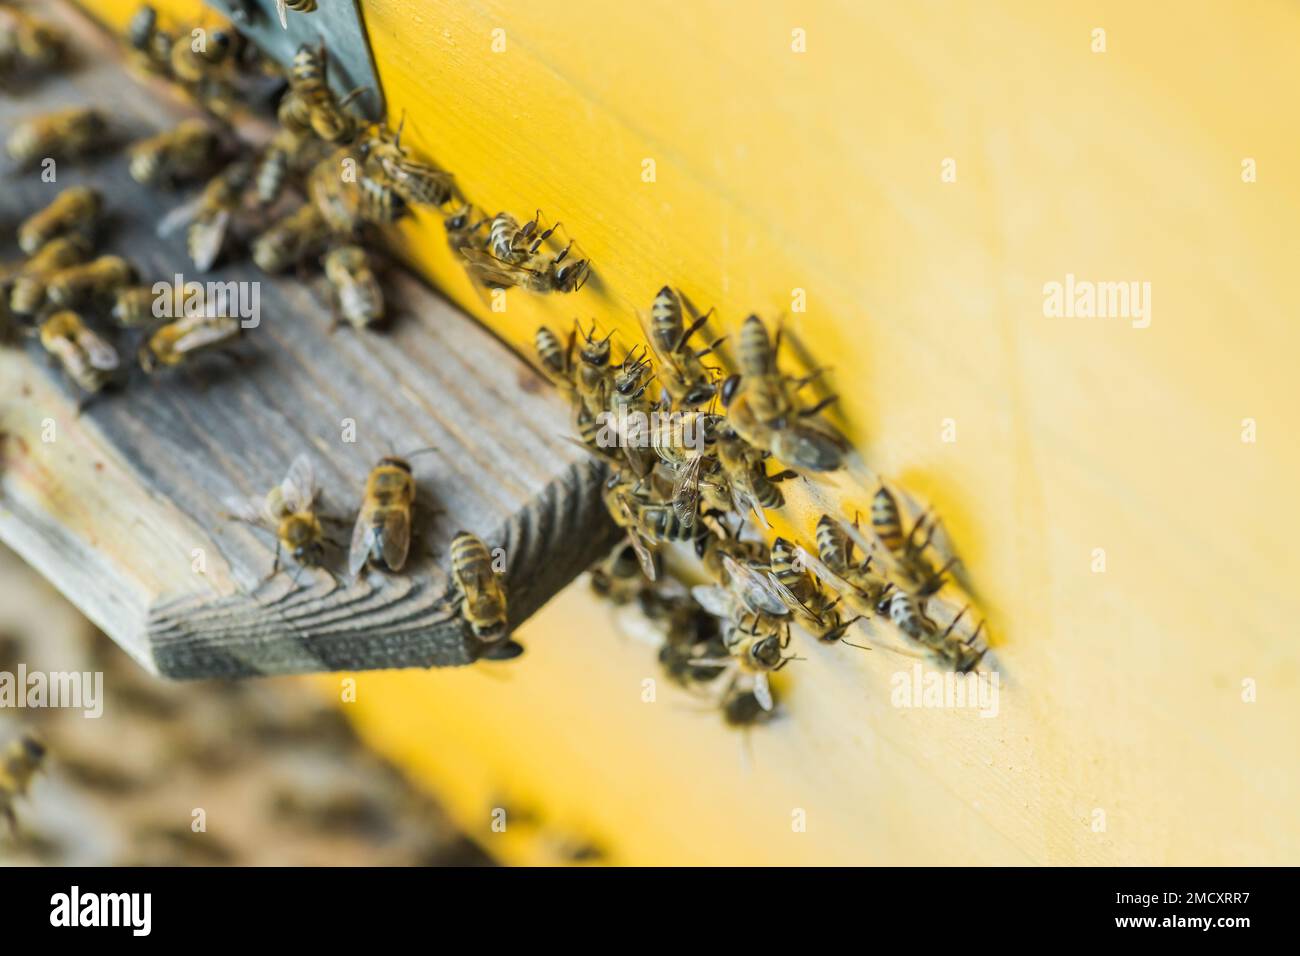 From beehive entrancebees creep out. Honey-bee colony guards the hive from looting honeydew. The bees return to the beehive after the honeyflow. Bee-g Stock Photo